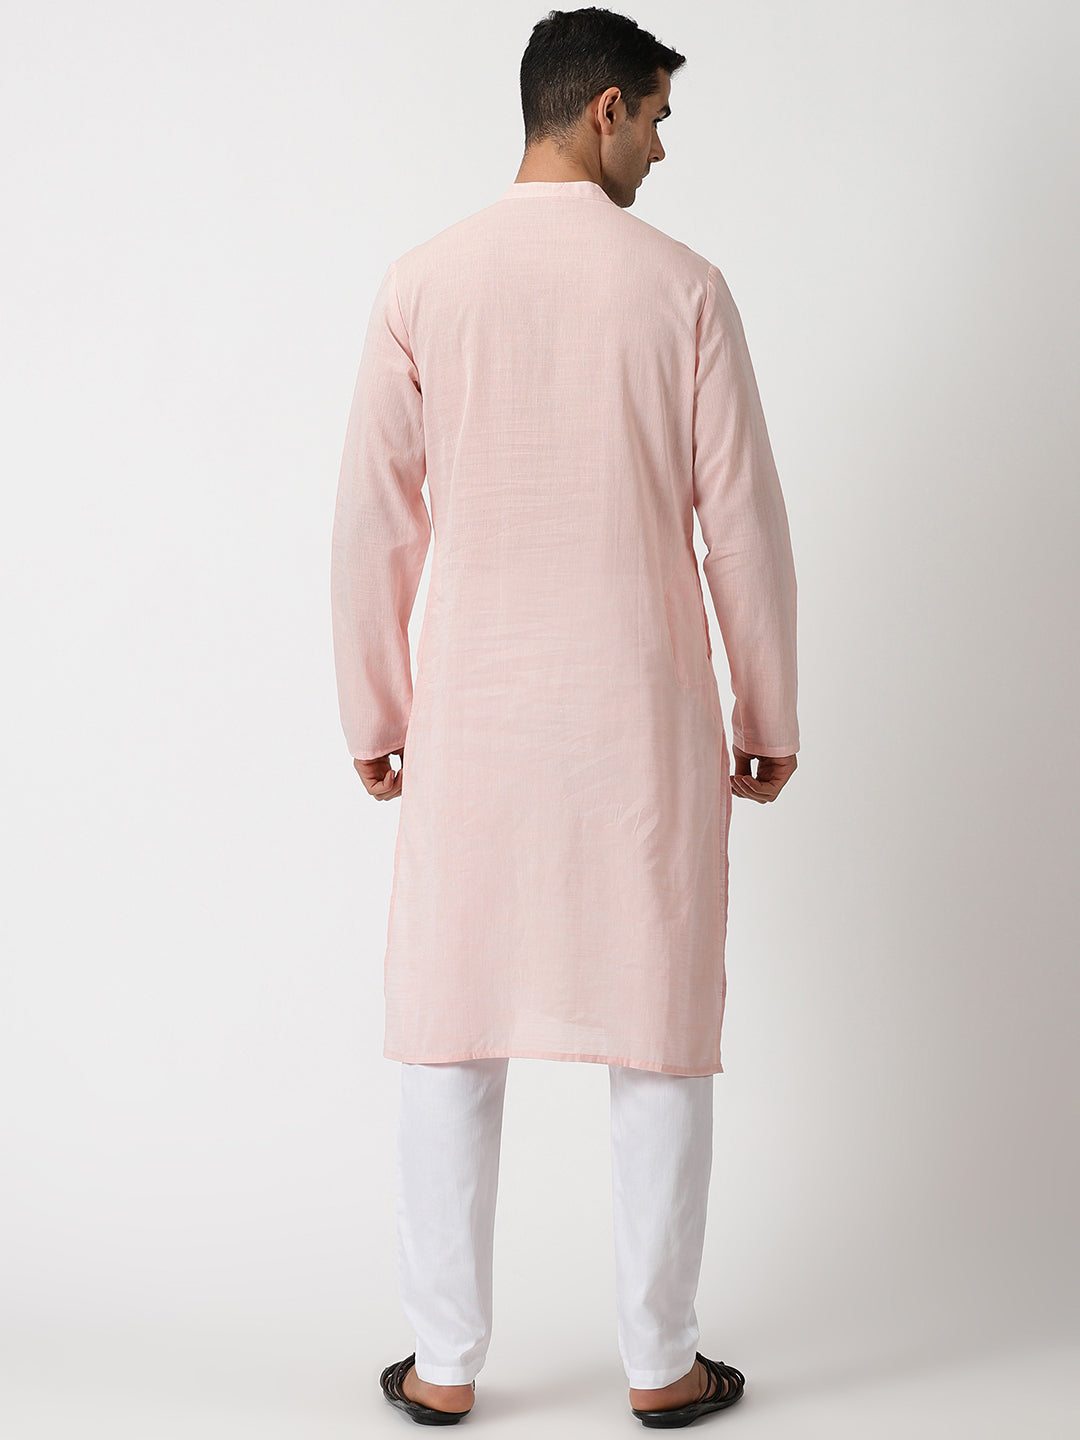 Pink Cotton Kurta with Embroidery around the Placket